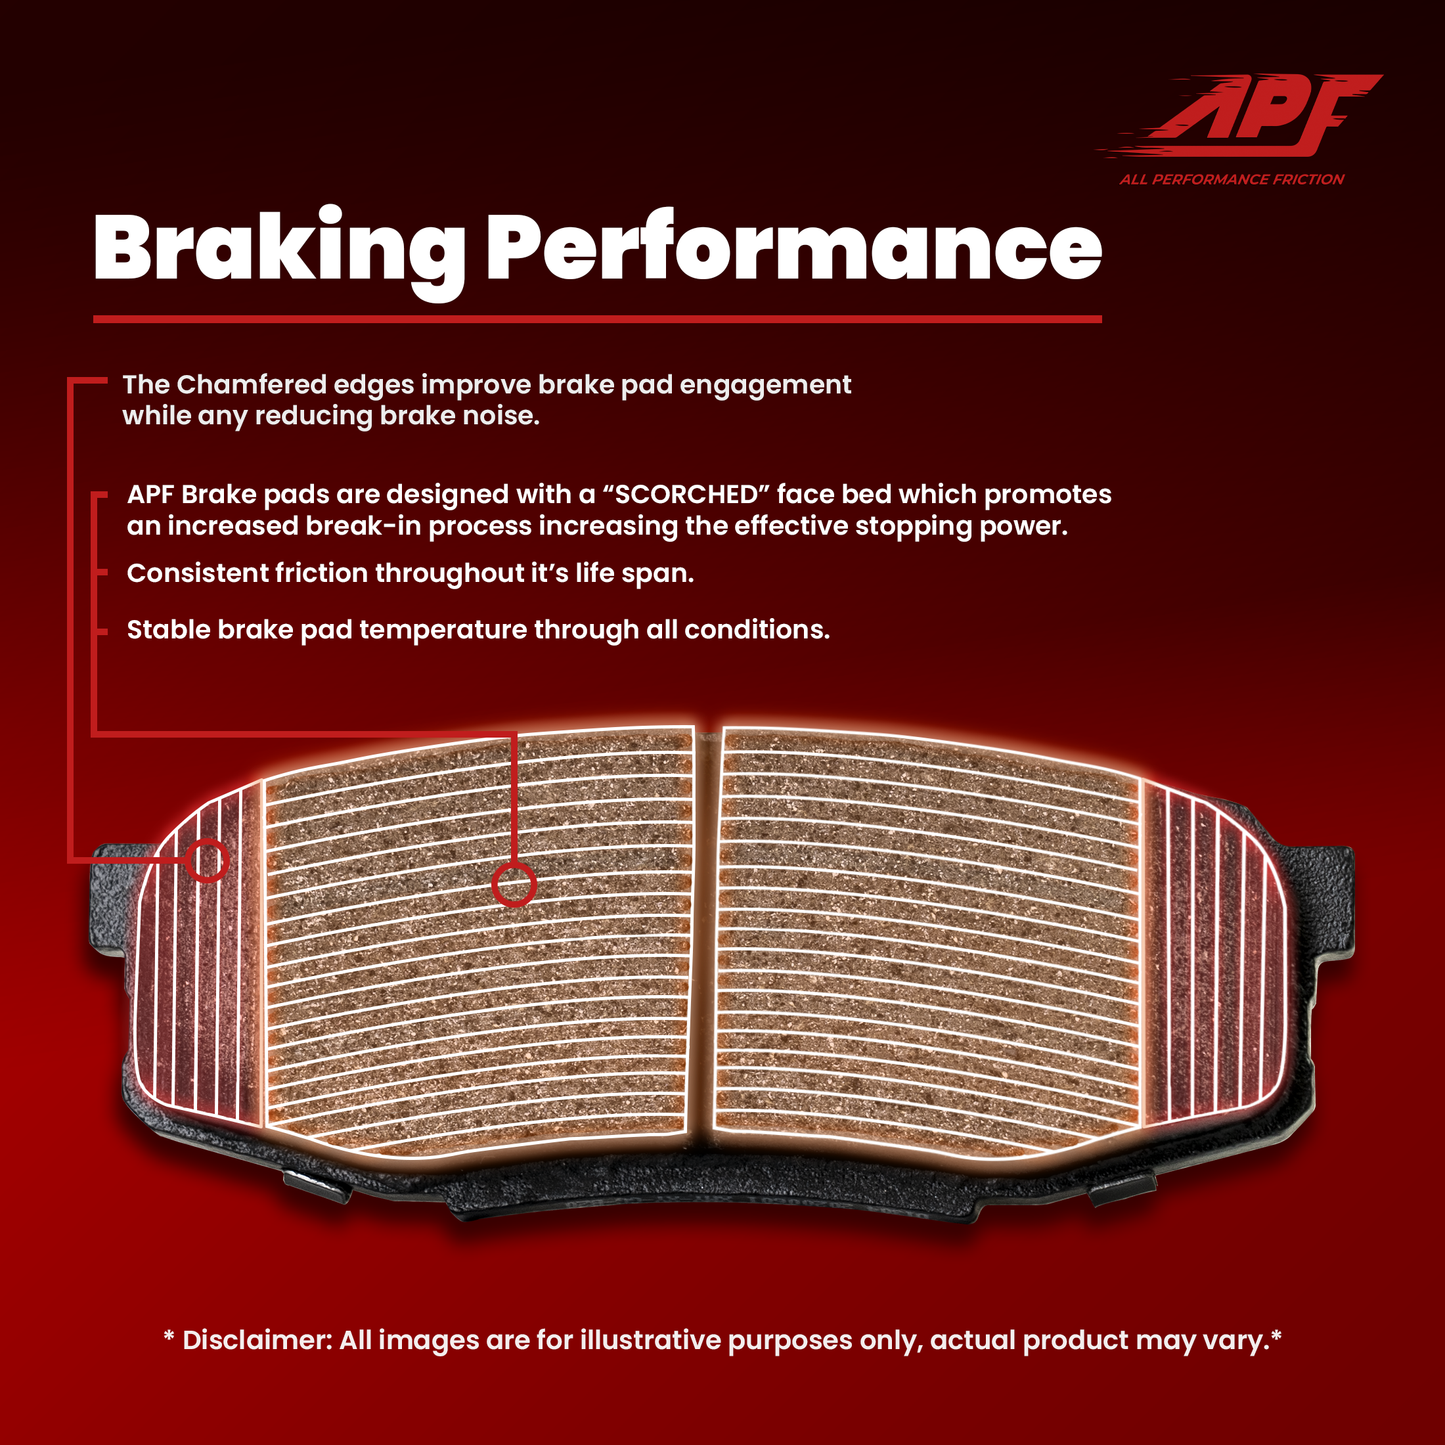 APF All Performance Friction Rear Rotors and Pads Half Kit compatible with Nissan Pathfinder Armada 2004-2004 Zinc Drilled Slotted Rotors with Ceramic Carbon Fiber Brake Pads | $152.59